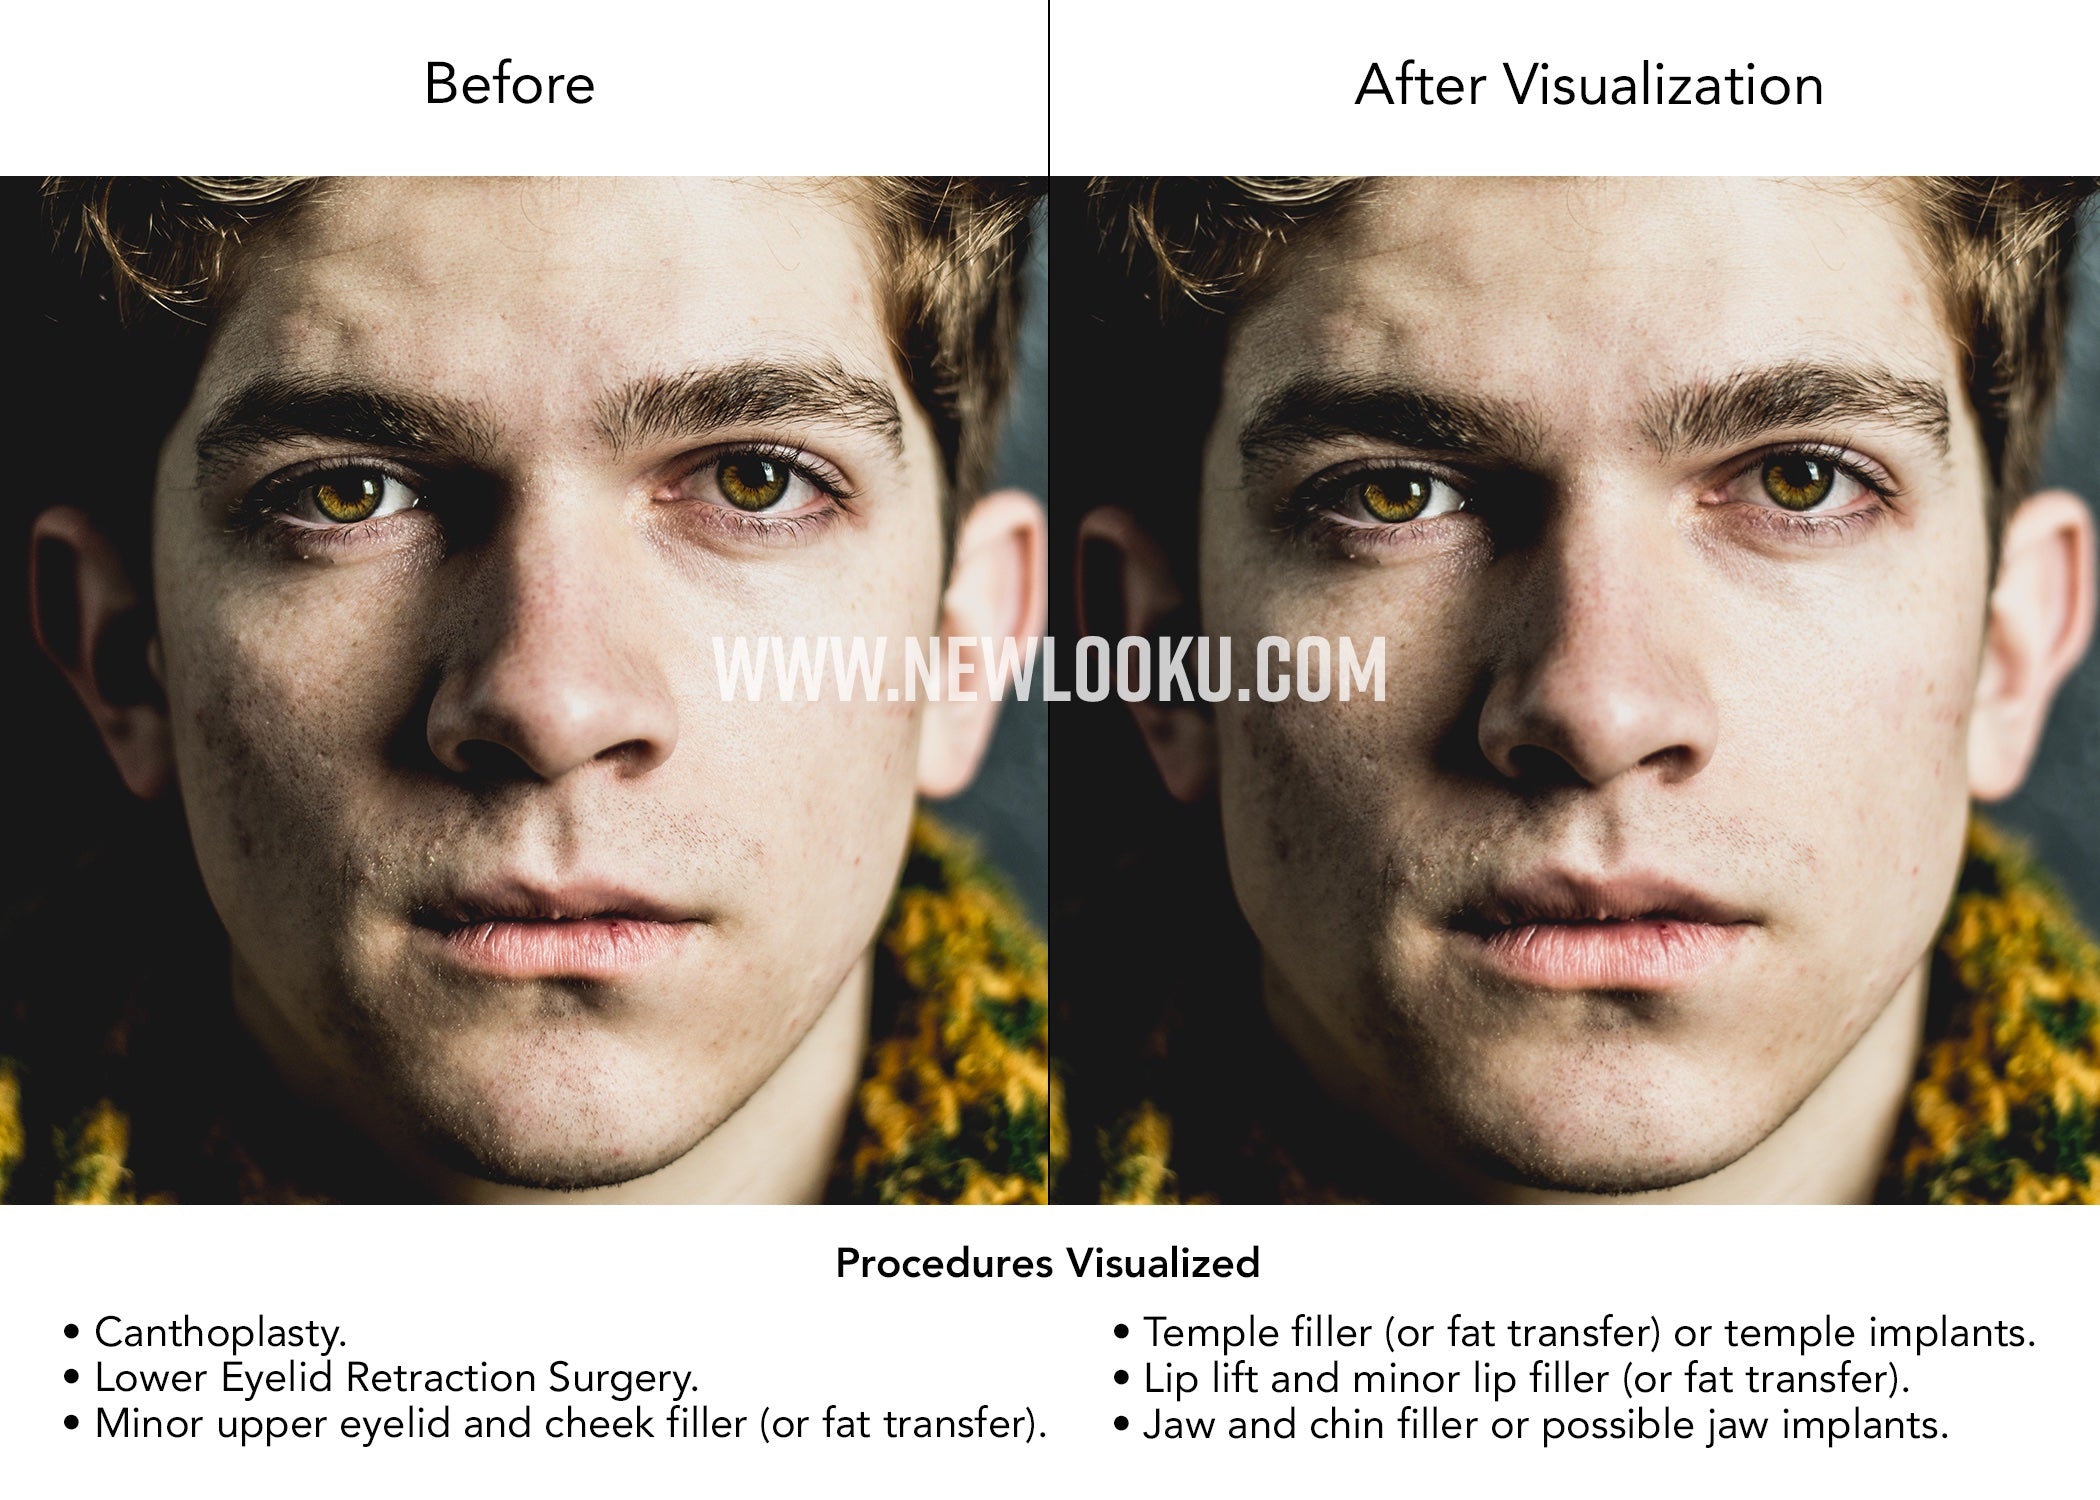 Male Plastic Surgery Visualization Before and After: Canthoplasty. Lower Eyelid Retraction Surgery. Minor upper eyelid and cheek filler (or fat transfer). Temple filler (or fat transfer) or possible temple implants. Lip lift with possible lip filler (or fat transfer). Jaw and chin filler or possible jaw implants.